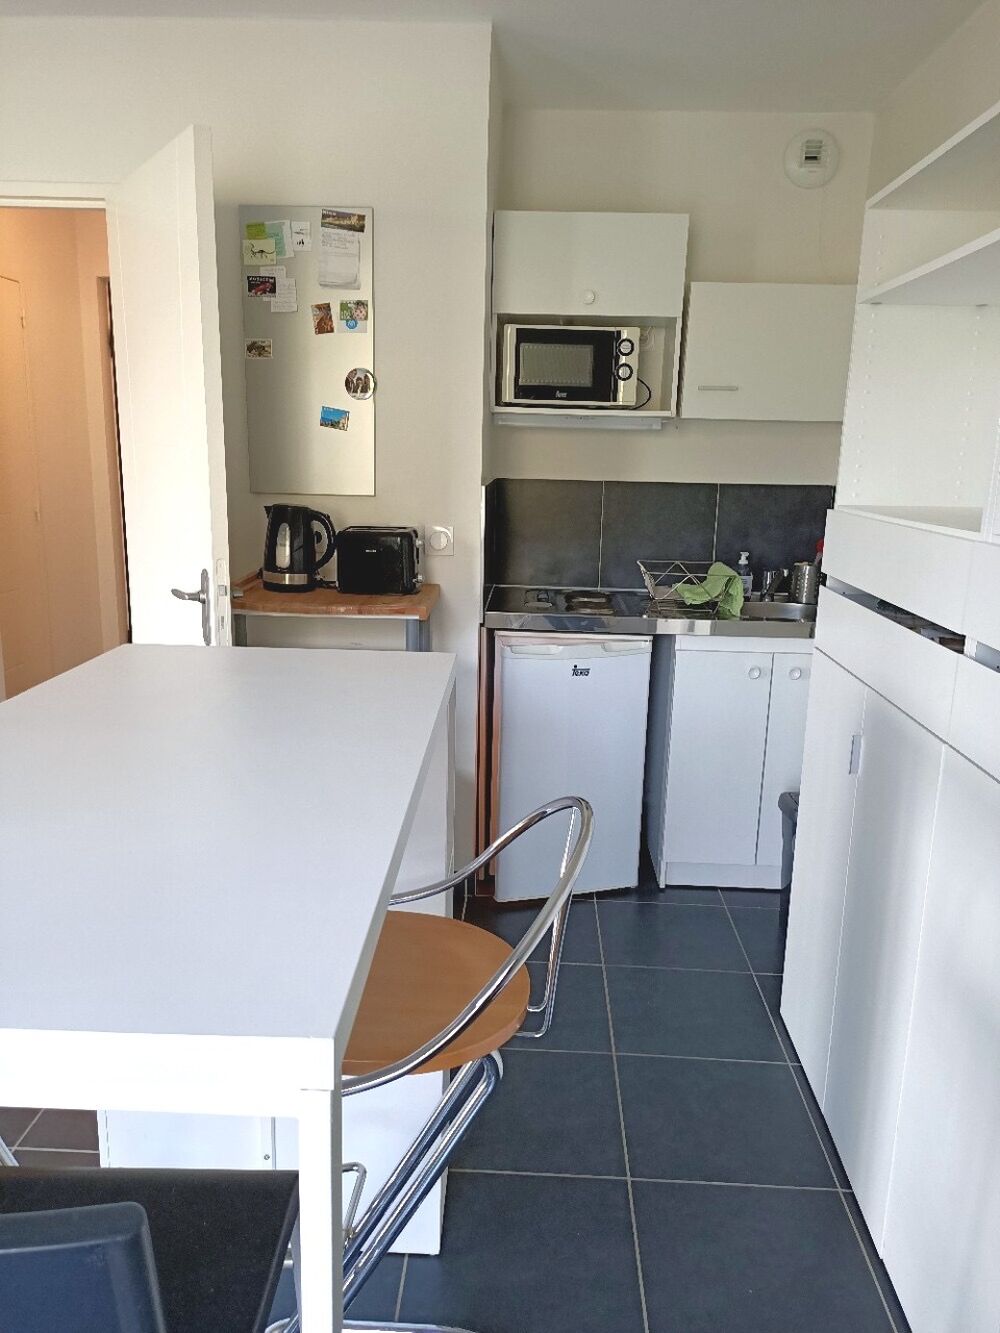 location Appartement - 2 pice(s) - 41 m Grenoble (38000)